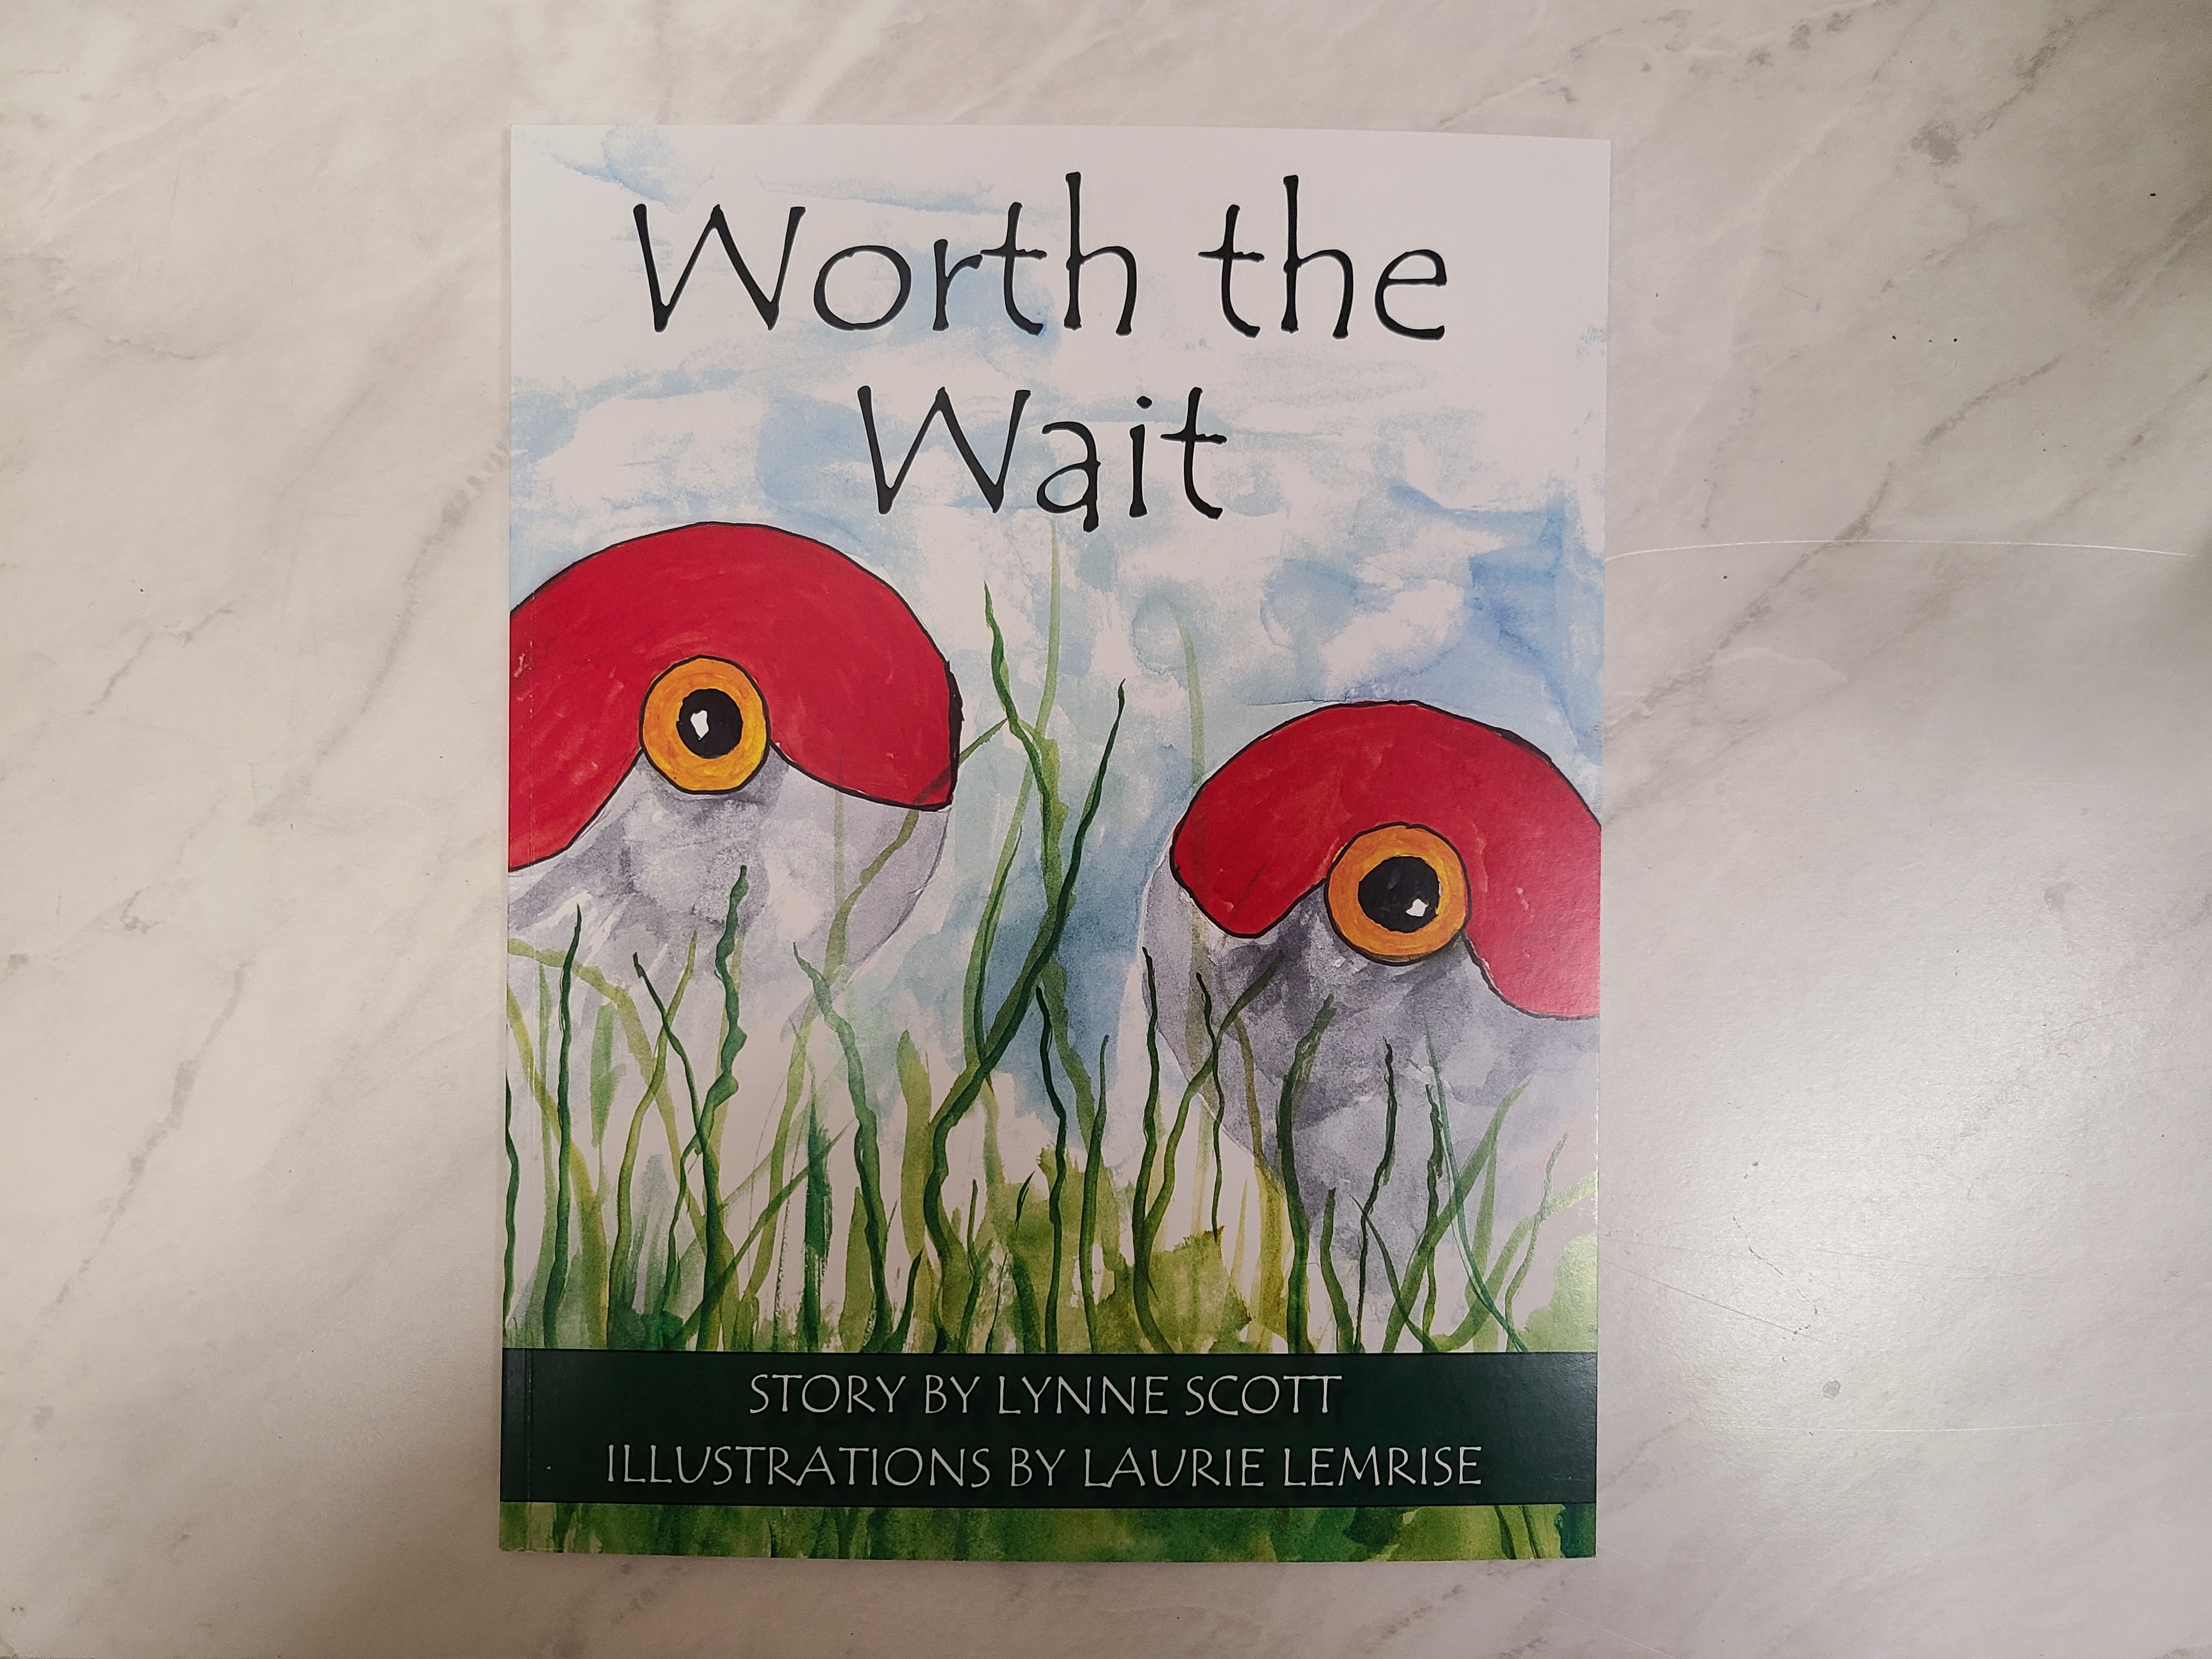 Worth the Wait story by Lynne Scott and illustrations by Laurie Lemrise (Softcover)